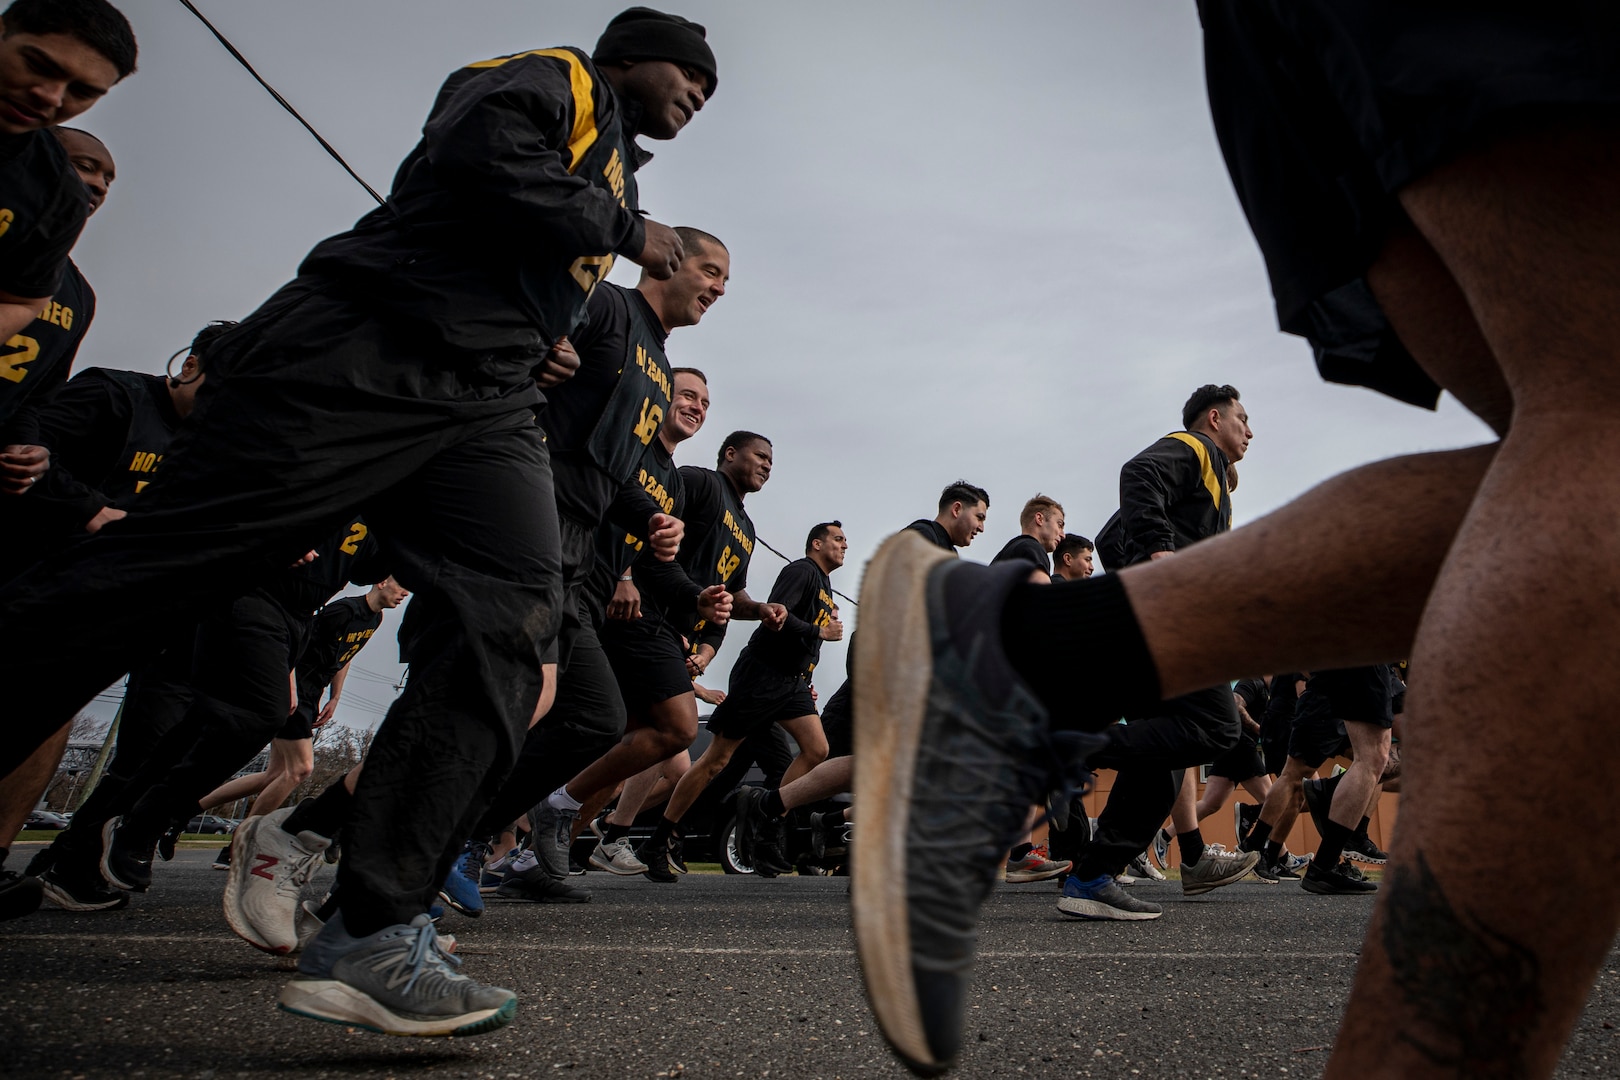 U.S. Army Soldiers in the 1-254th Regional Training Institute's Infantry Advanced Leaders Course 22-02 take part in an Army Combat Fitness Test at the National Guard Training Center in Sea Girt, New Jersey, March 23, 2022.